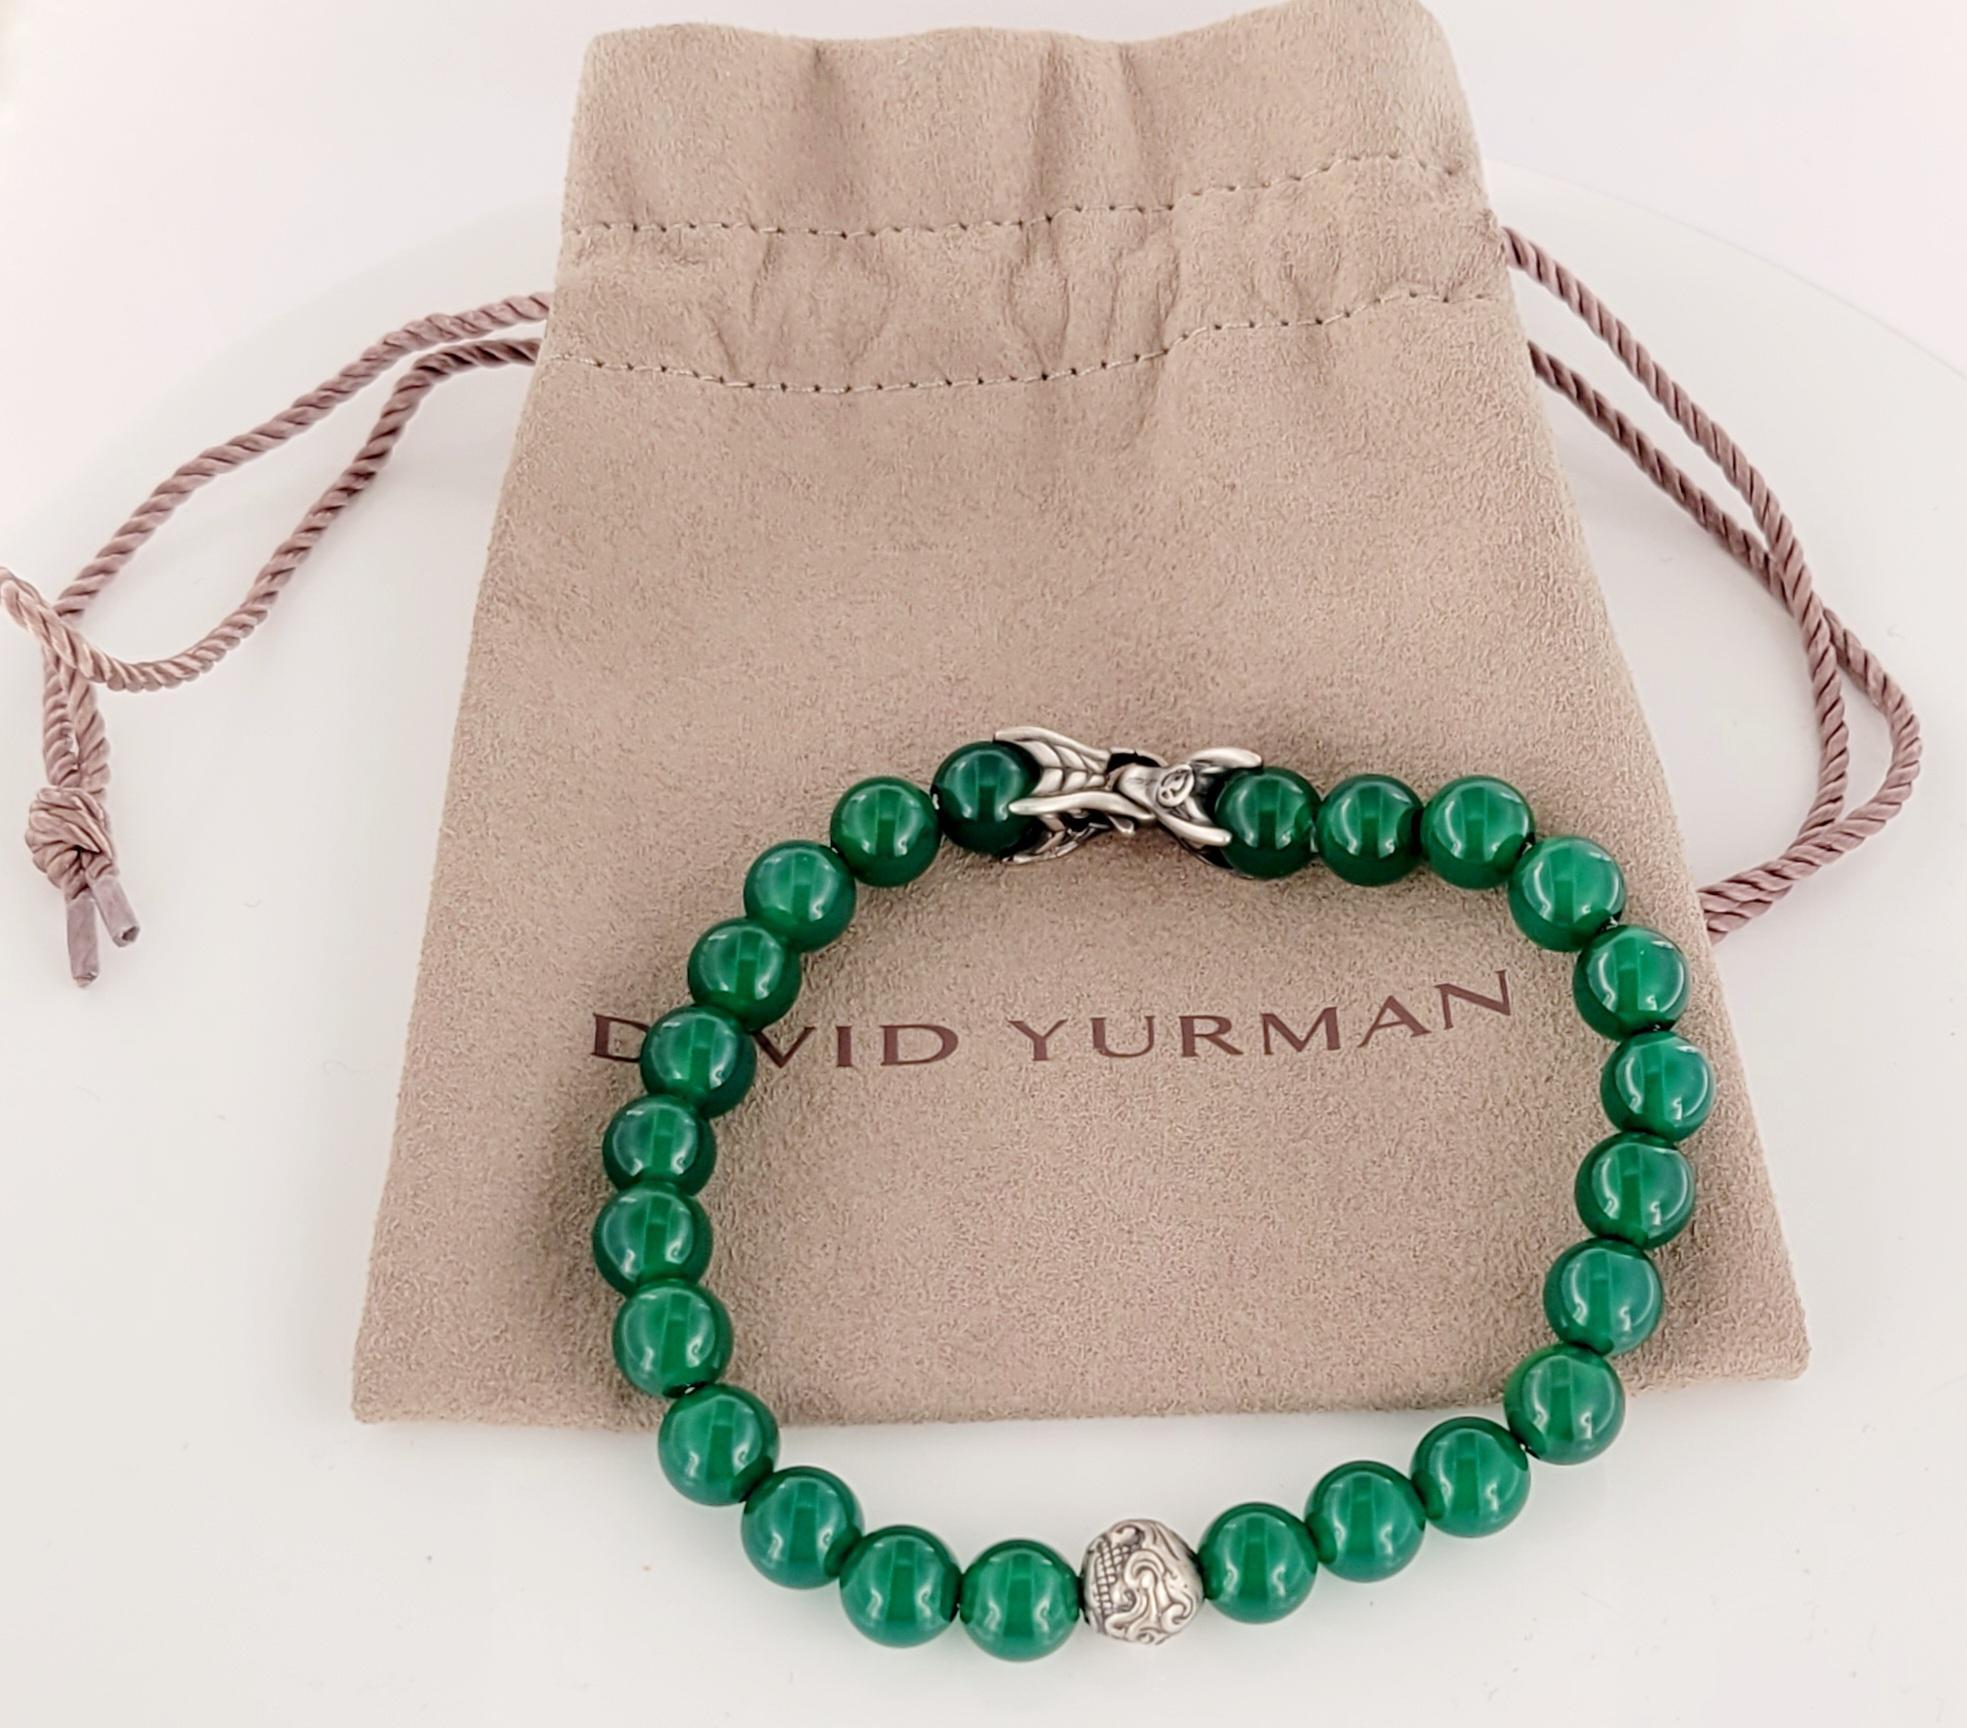 Brand David Yurman
Style Green beaded bracelet 
Material Stainless Steel
Onyx width 8mm
Bracelet Length 8.5''
Nice gift for any occasions
Comes with David Yurman pouch
Condition New Never Worn